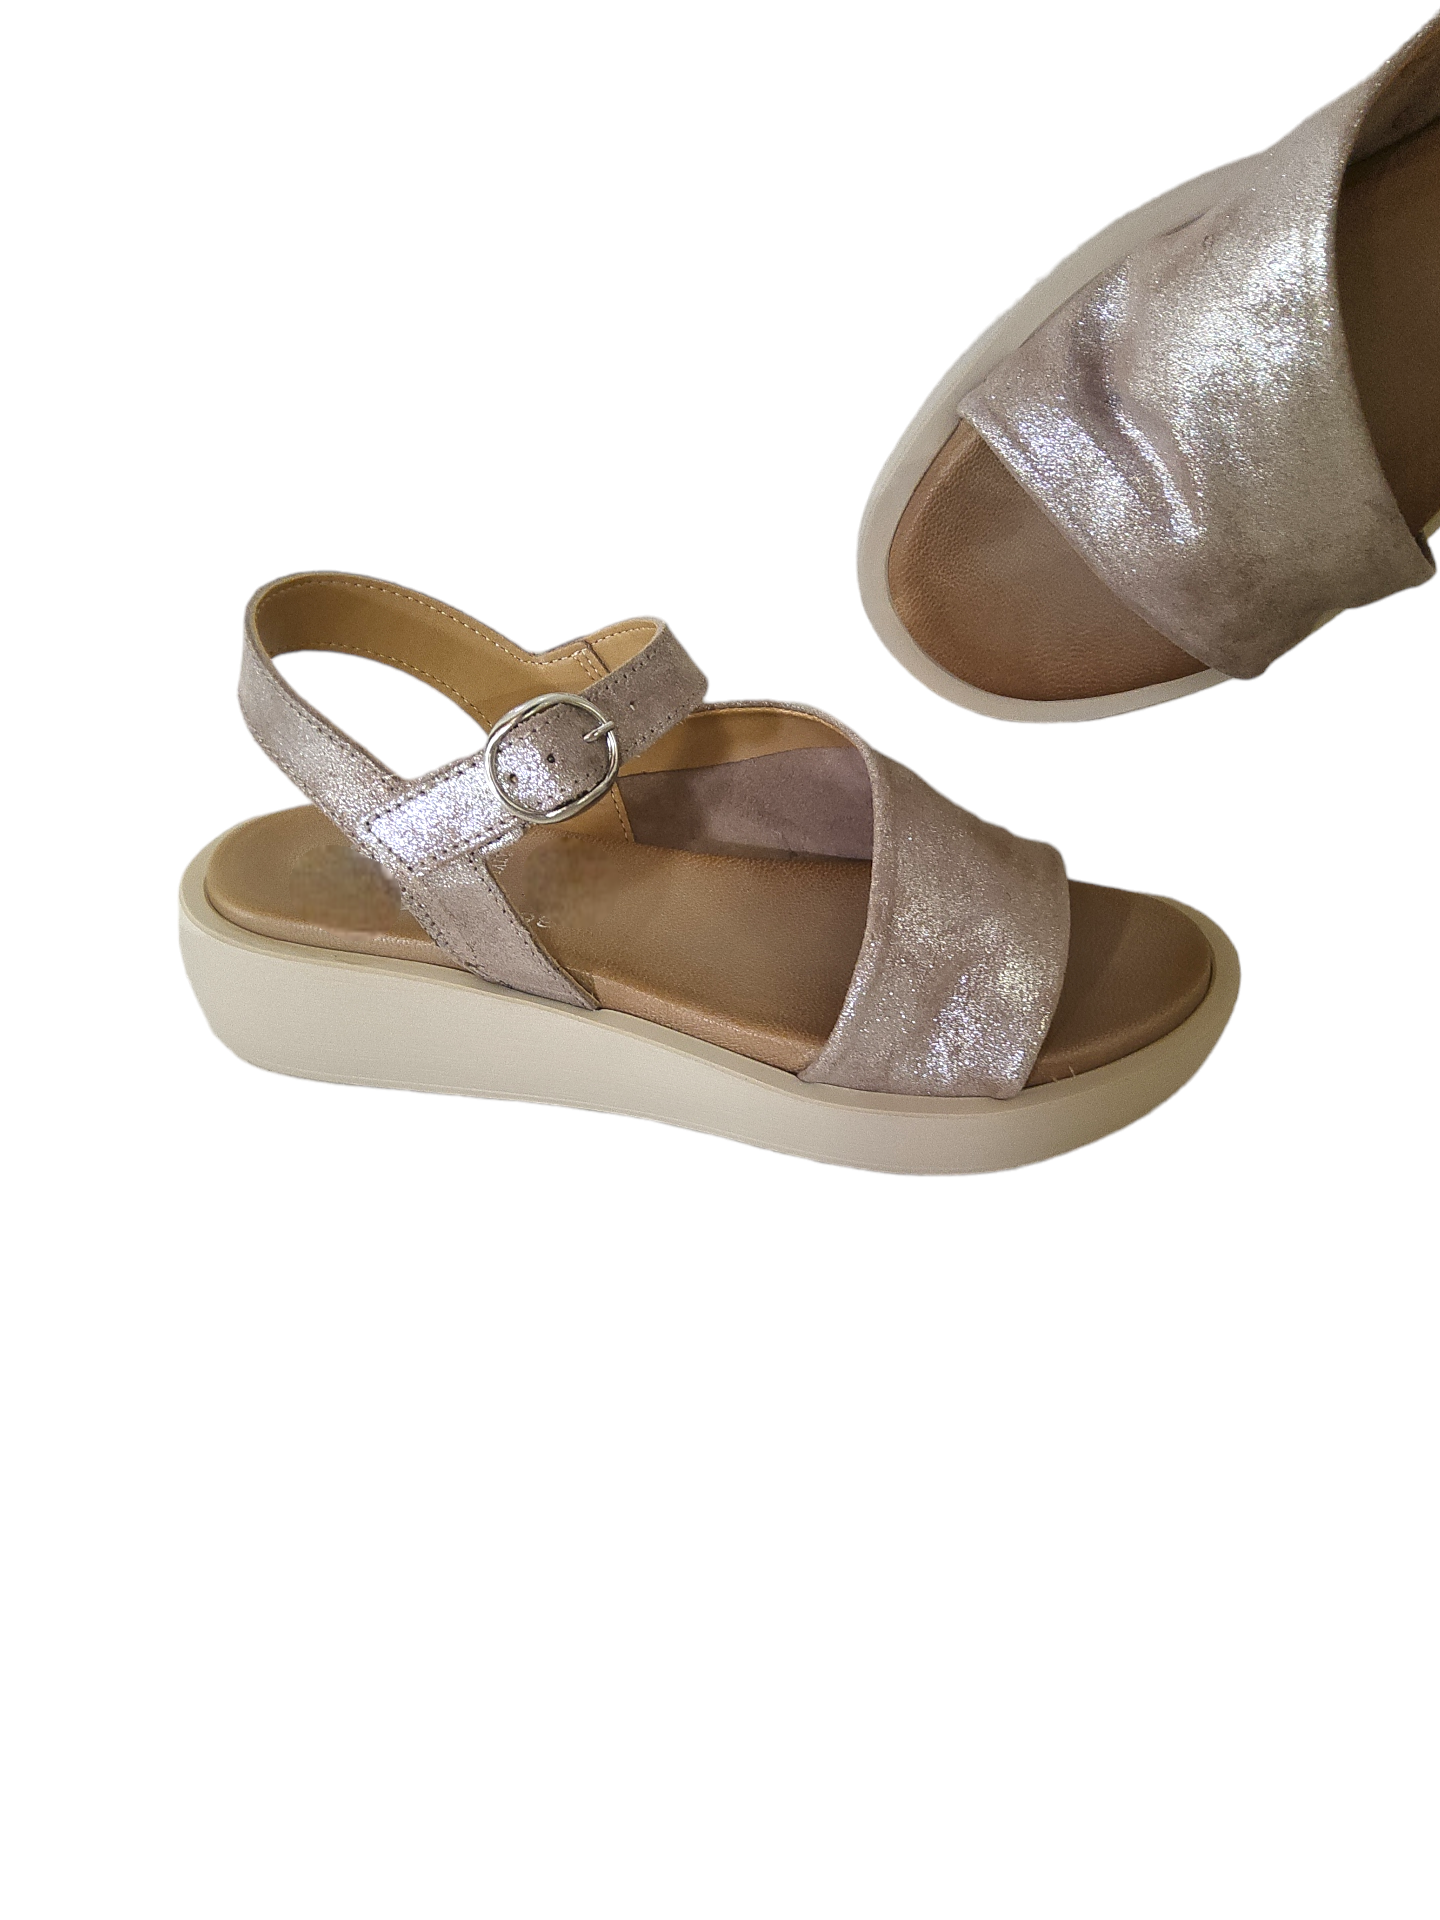 Grey suede leather sandals